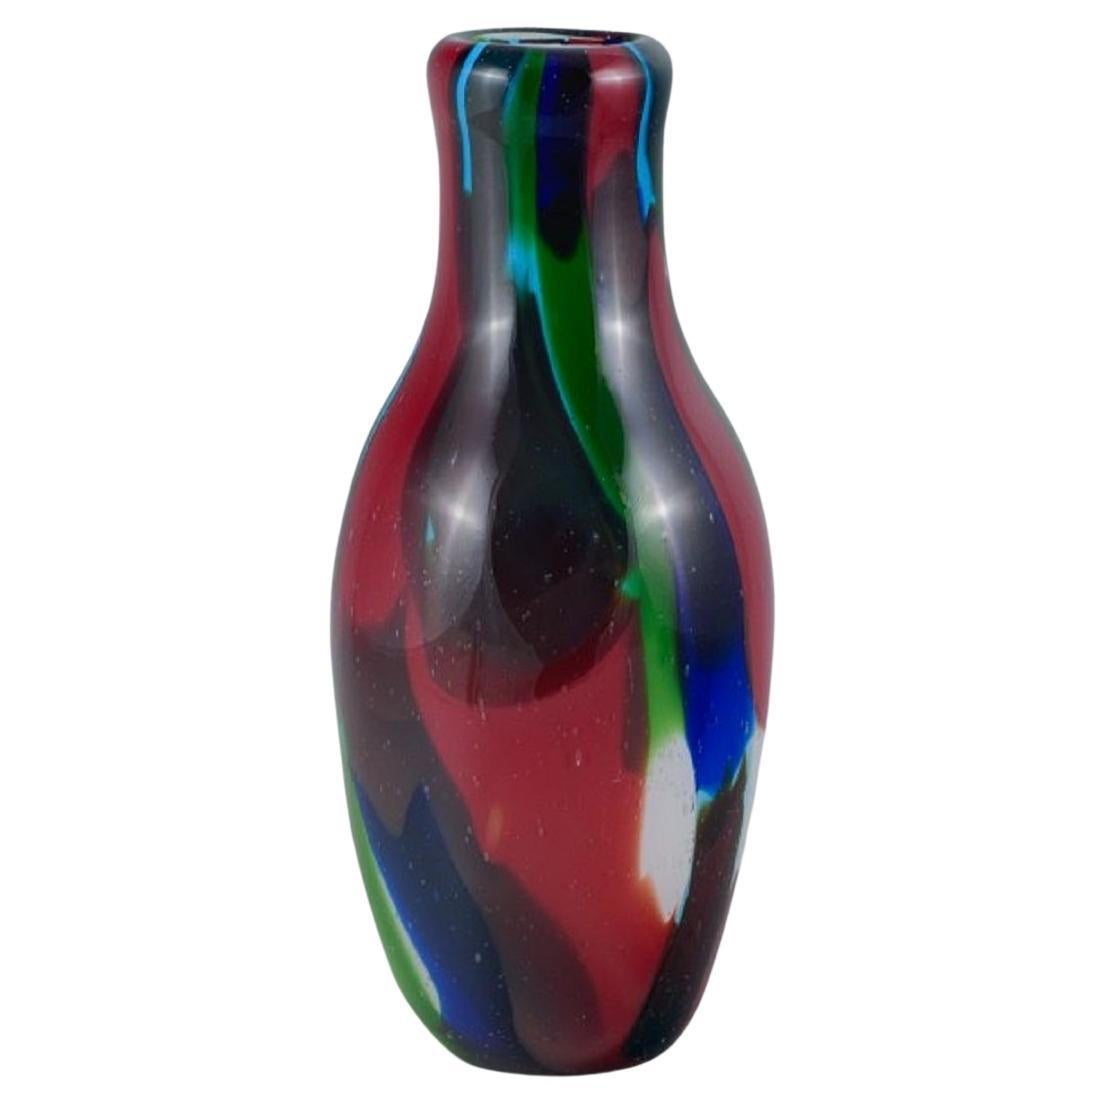 Large Mouth-Blown Murano Vase in Art Glass, 1970s For Sale